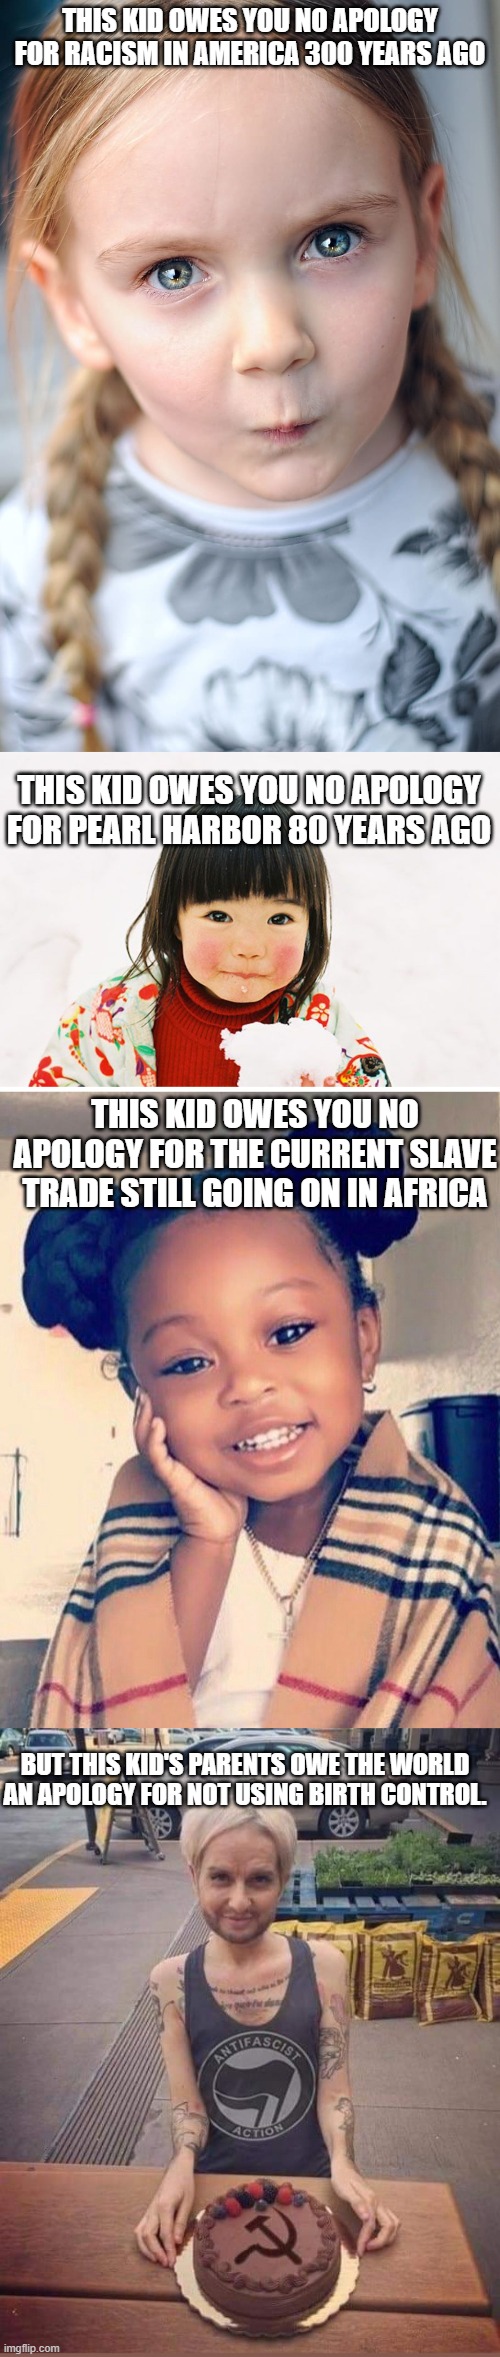 Little snarky, but at what point do we stop blaming unrelated people for others' actions? | THIS KID OWES YOU NO APOLOGY FOR RACISM IN AMERICA 300 YEARS AGO; THIS KID OWES YOU NO APOLOGY FOR PEARL HARBOR 80 YEARS AGO; THIS KID OWES YOU NO APOLOGY FOR THE CURRENT SLAVE TRADE STILL GOING ON IN AFRICA; BUT THIS KID'S PARENTS OWE THE WORLD AN APOLOGY FOR NOT USING BIRTH CONTROL. | image tagged in politics,political meme,victim,racism | made w/ Imgflip meme maker